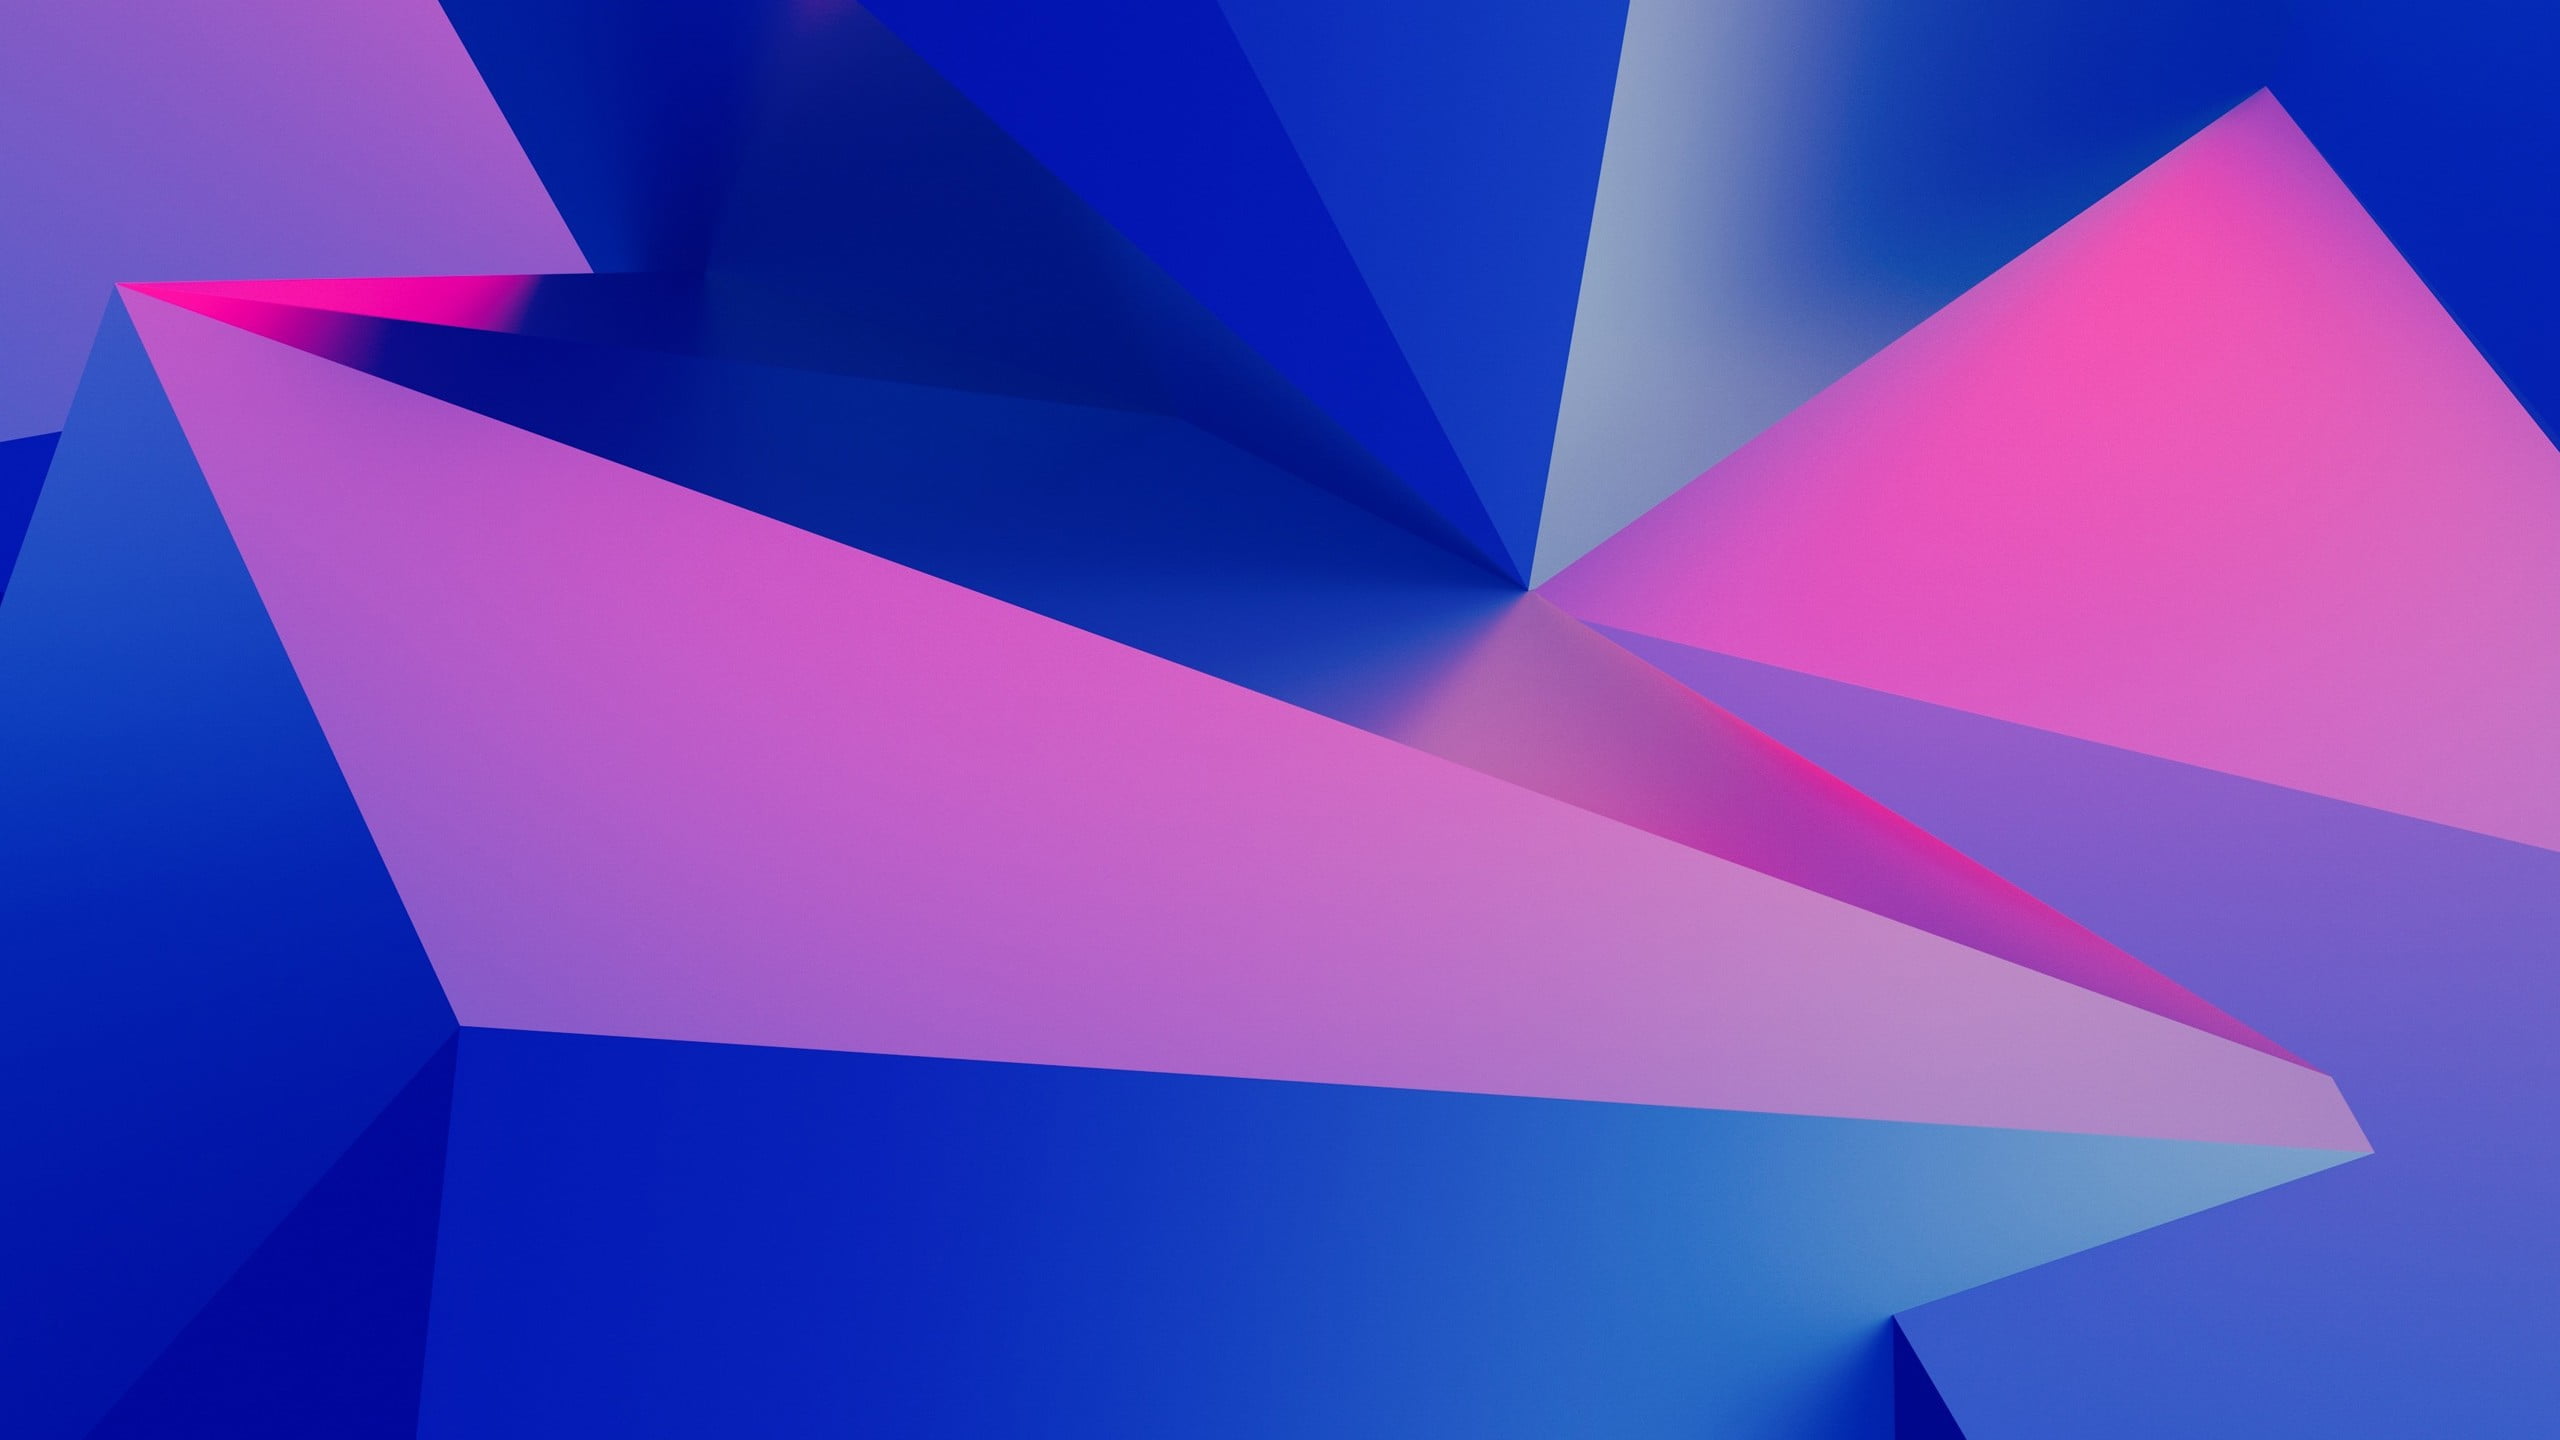 Geometrical Shapes Blue And Pink Digital Wallpaper Abstract 3d Hd Wallpaper Wallpaper Flare